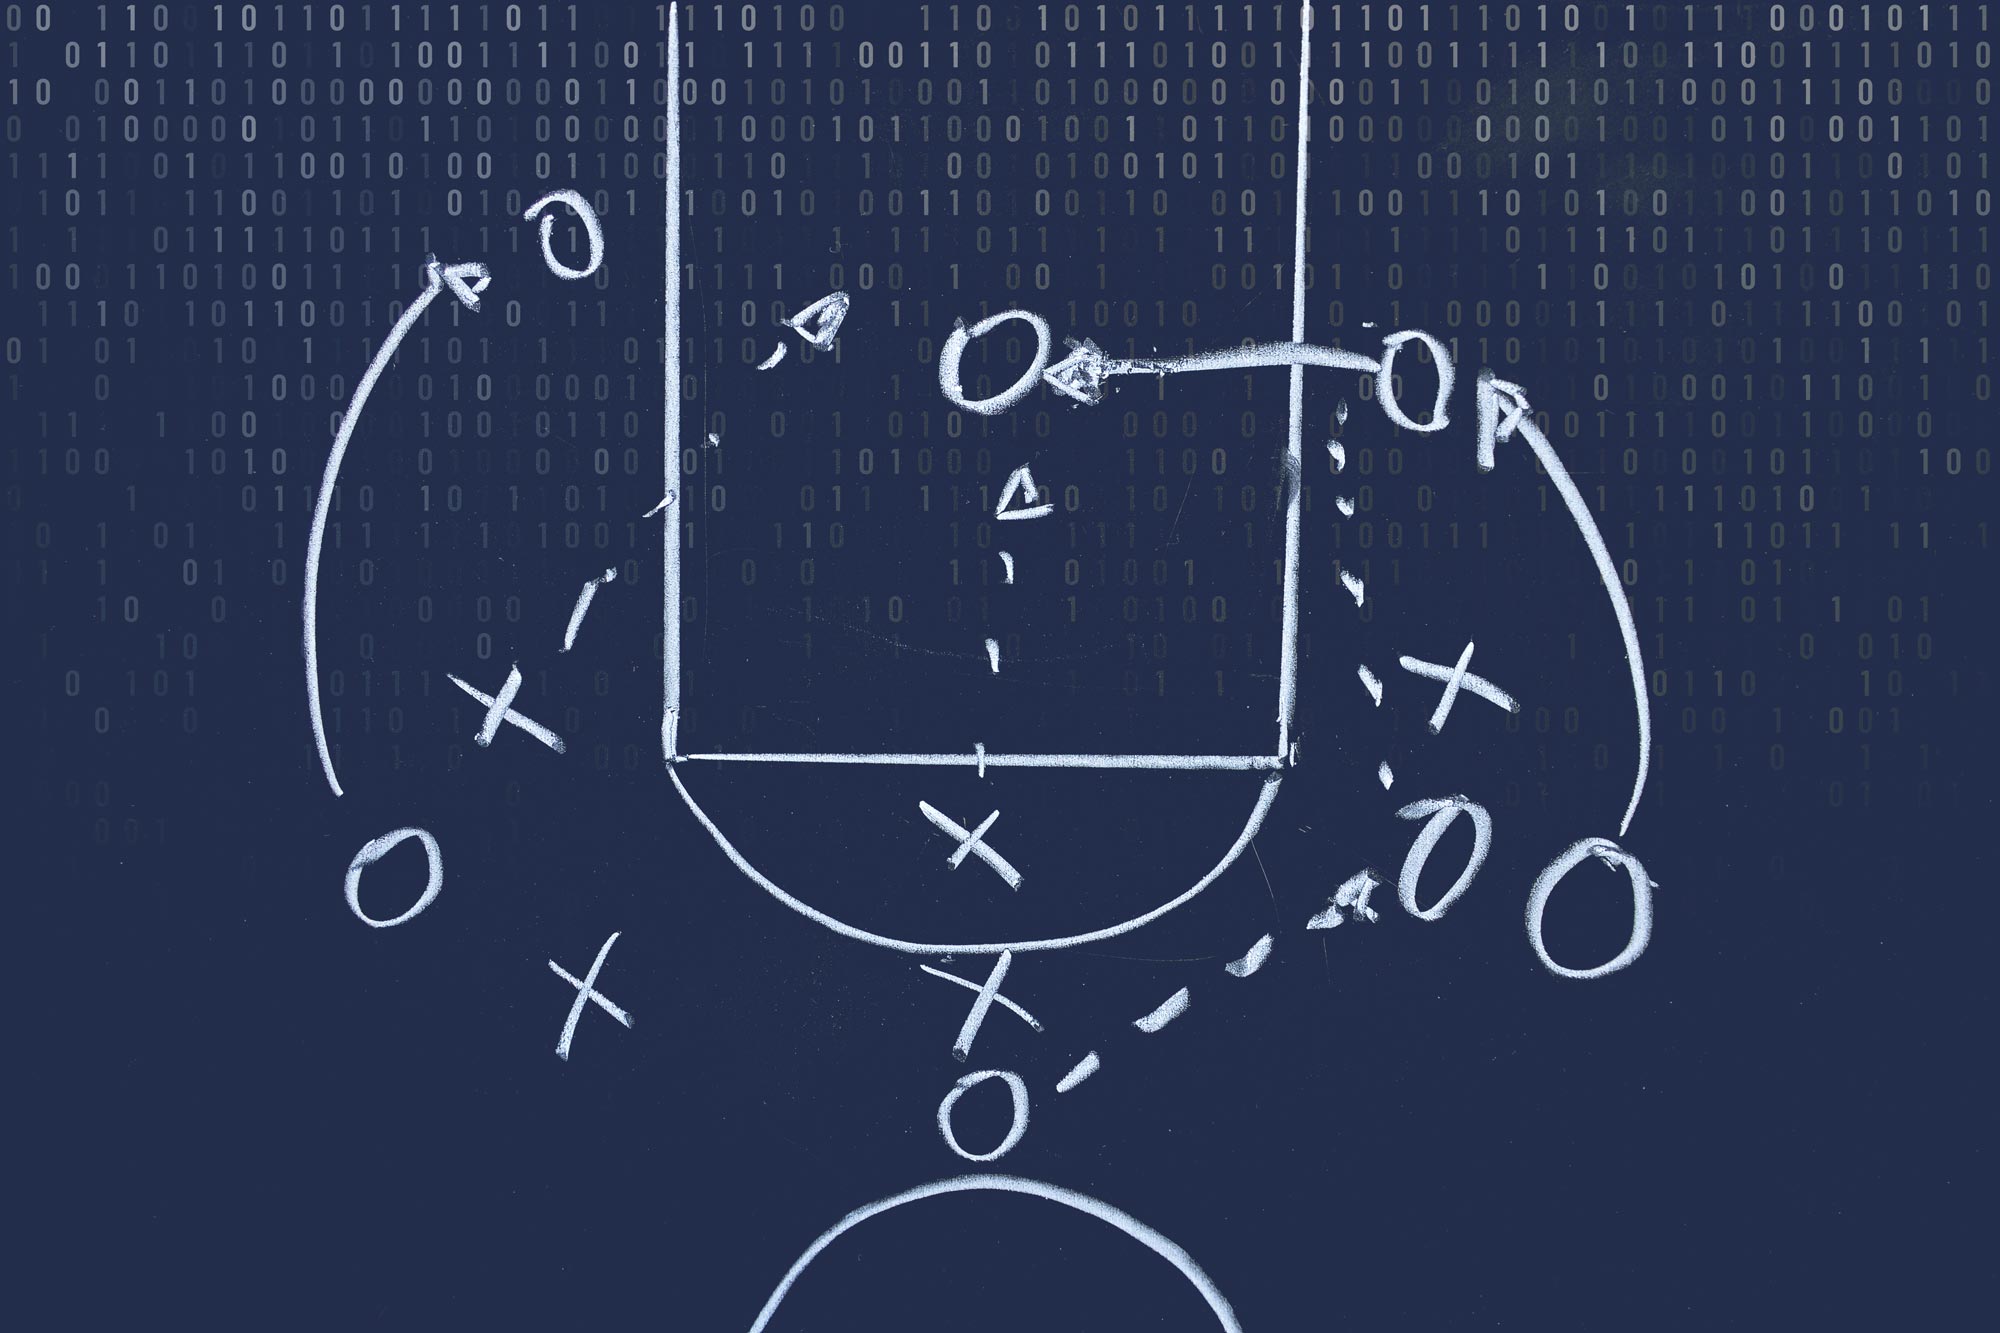 Illustration of a basketball court play with xs, os, dotted lines, solid lines, and arrows